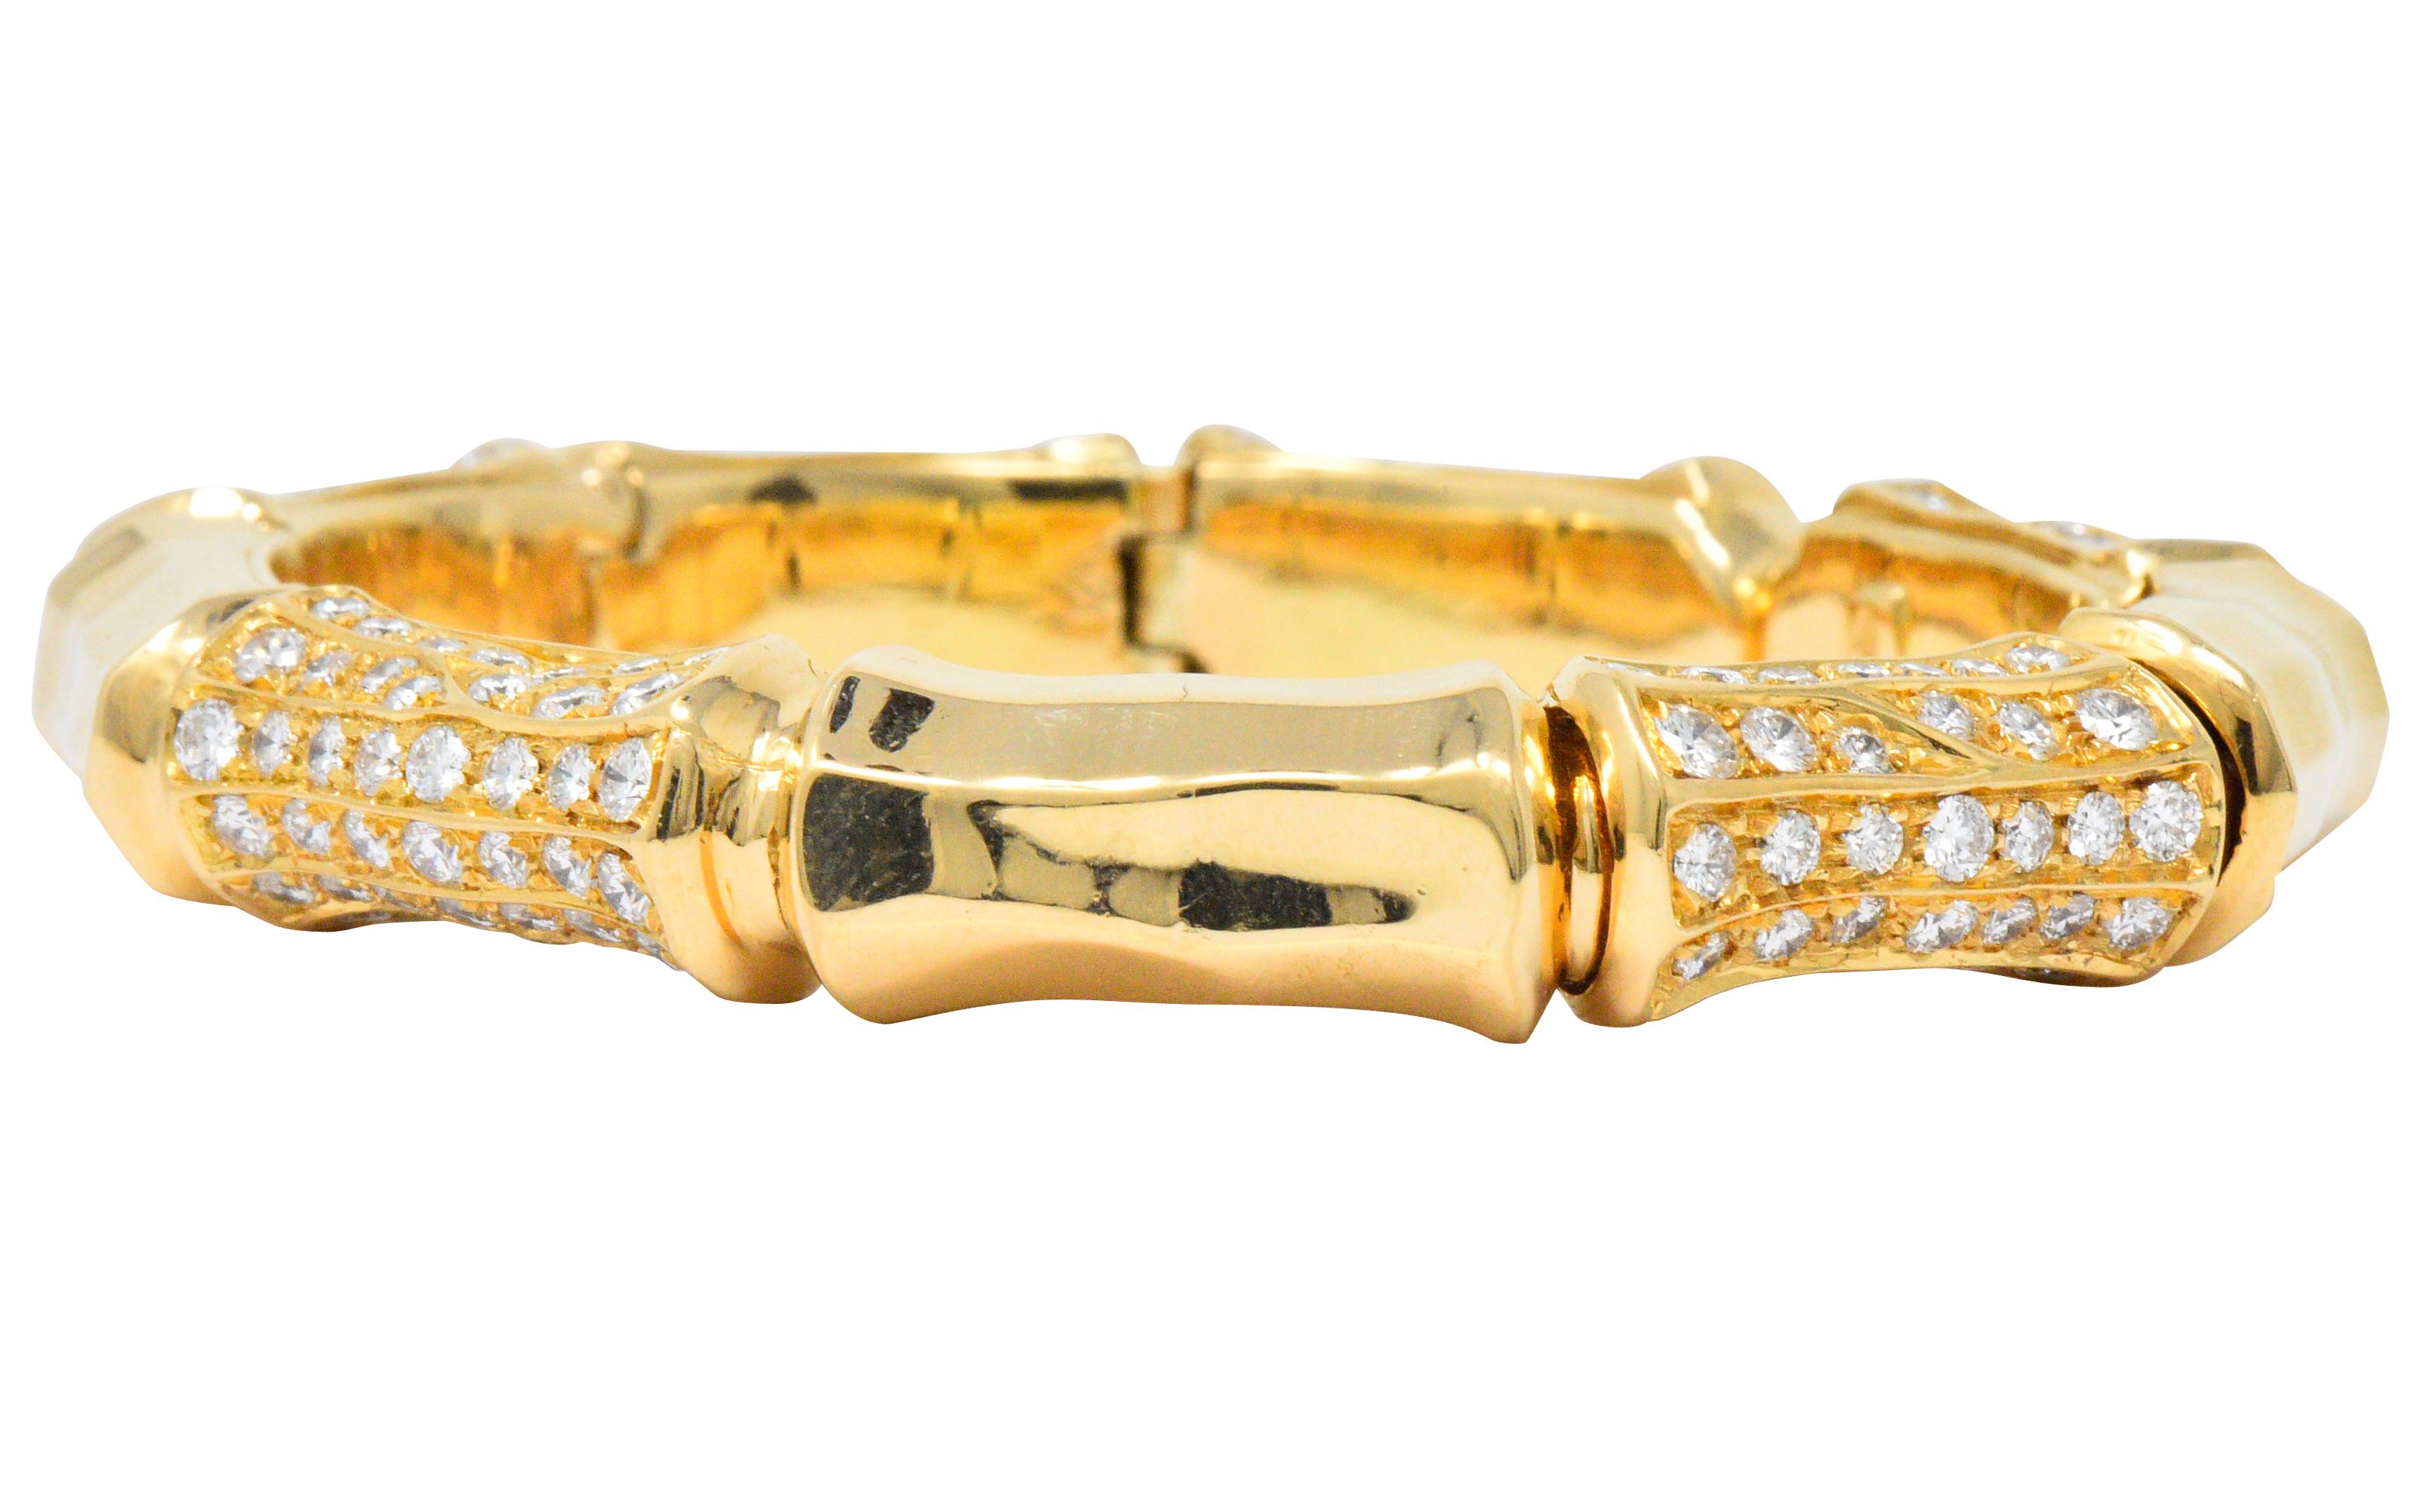 Flexible bangle cuff bracelet comprised of highly polished bamboo style links

Five links are deeply grooved with channels that are bead set with round brilliant cut diamonds

Total diamond weight is approximately 7.50 carats, F/G color with VS